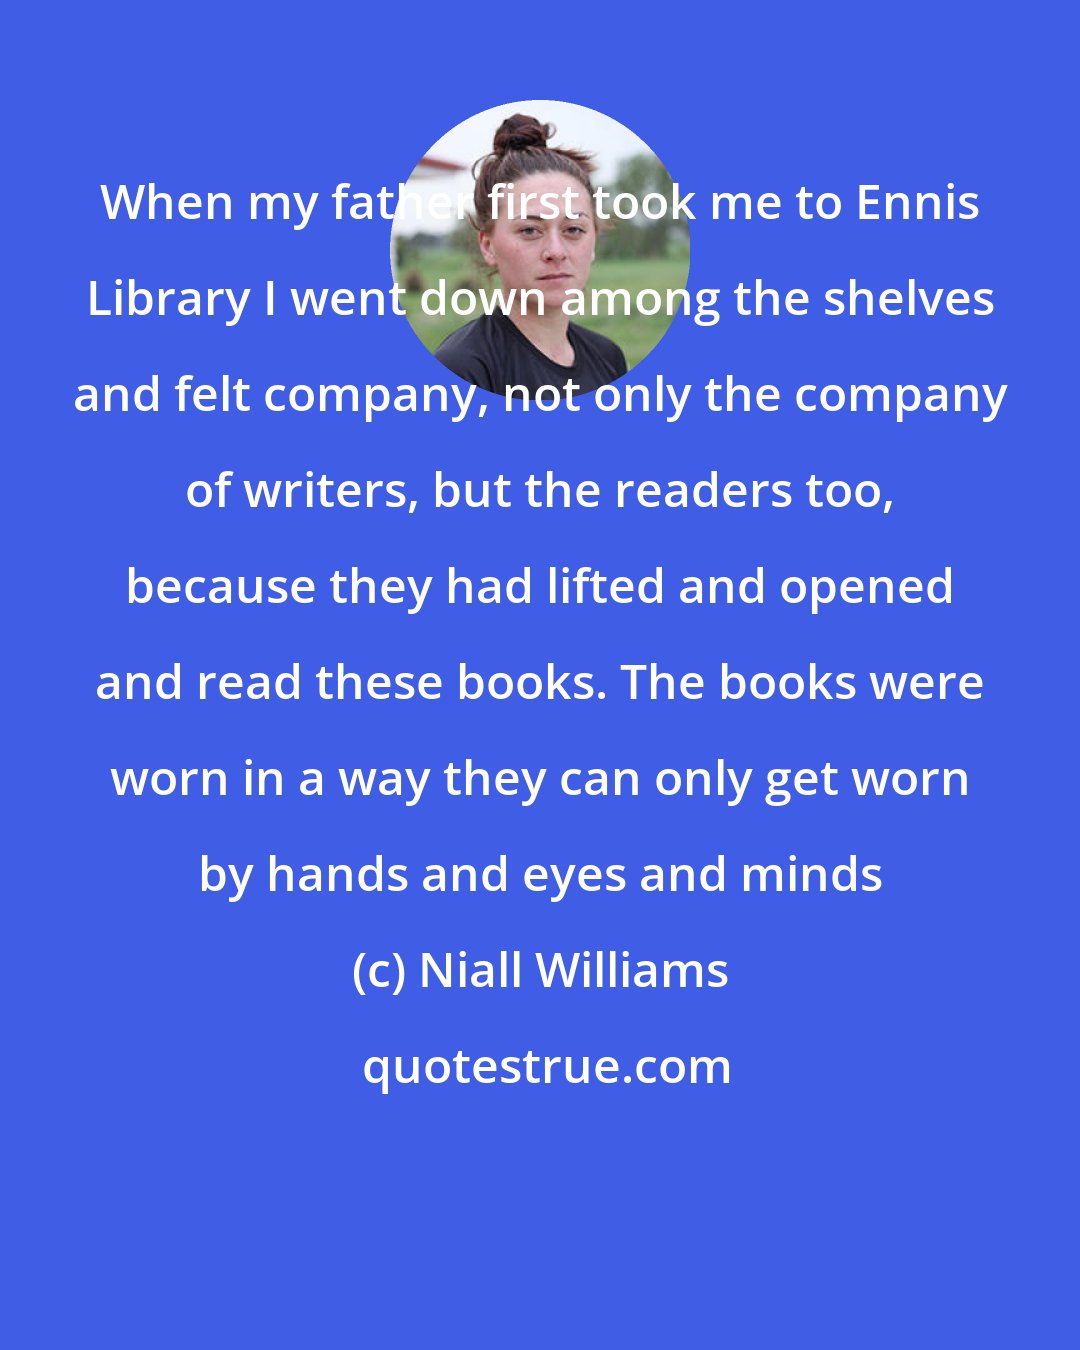 Niall Williams: When my father first took me to Ennis Library I went down among the shelves and felt company, not only the company of writers, but the readers too, because they had lifted and opened and read these books. The books were worn in a way they can only get worn by hands and eyes and minds